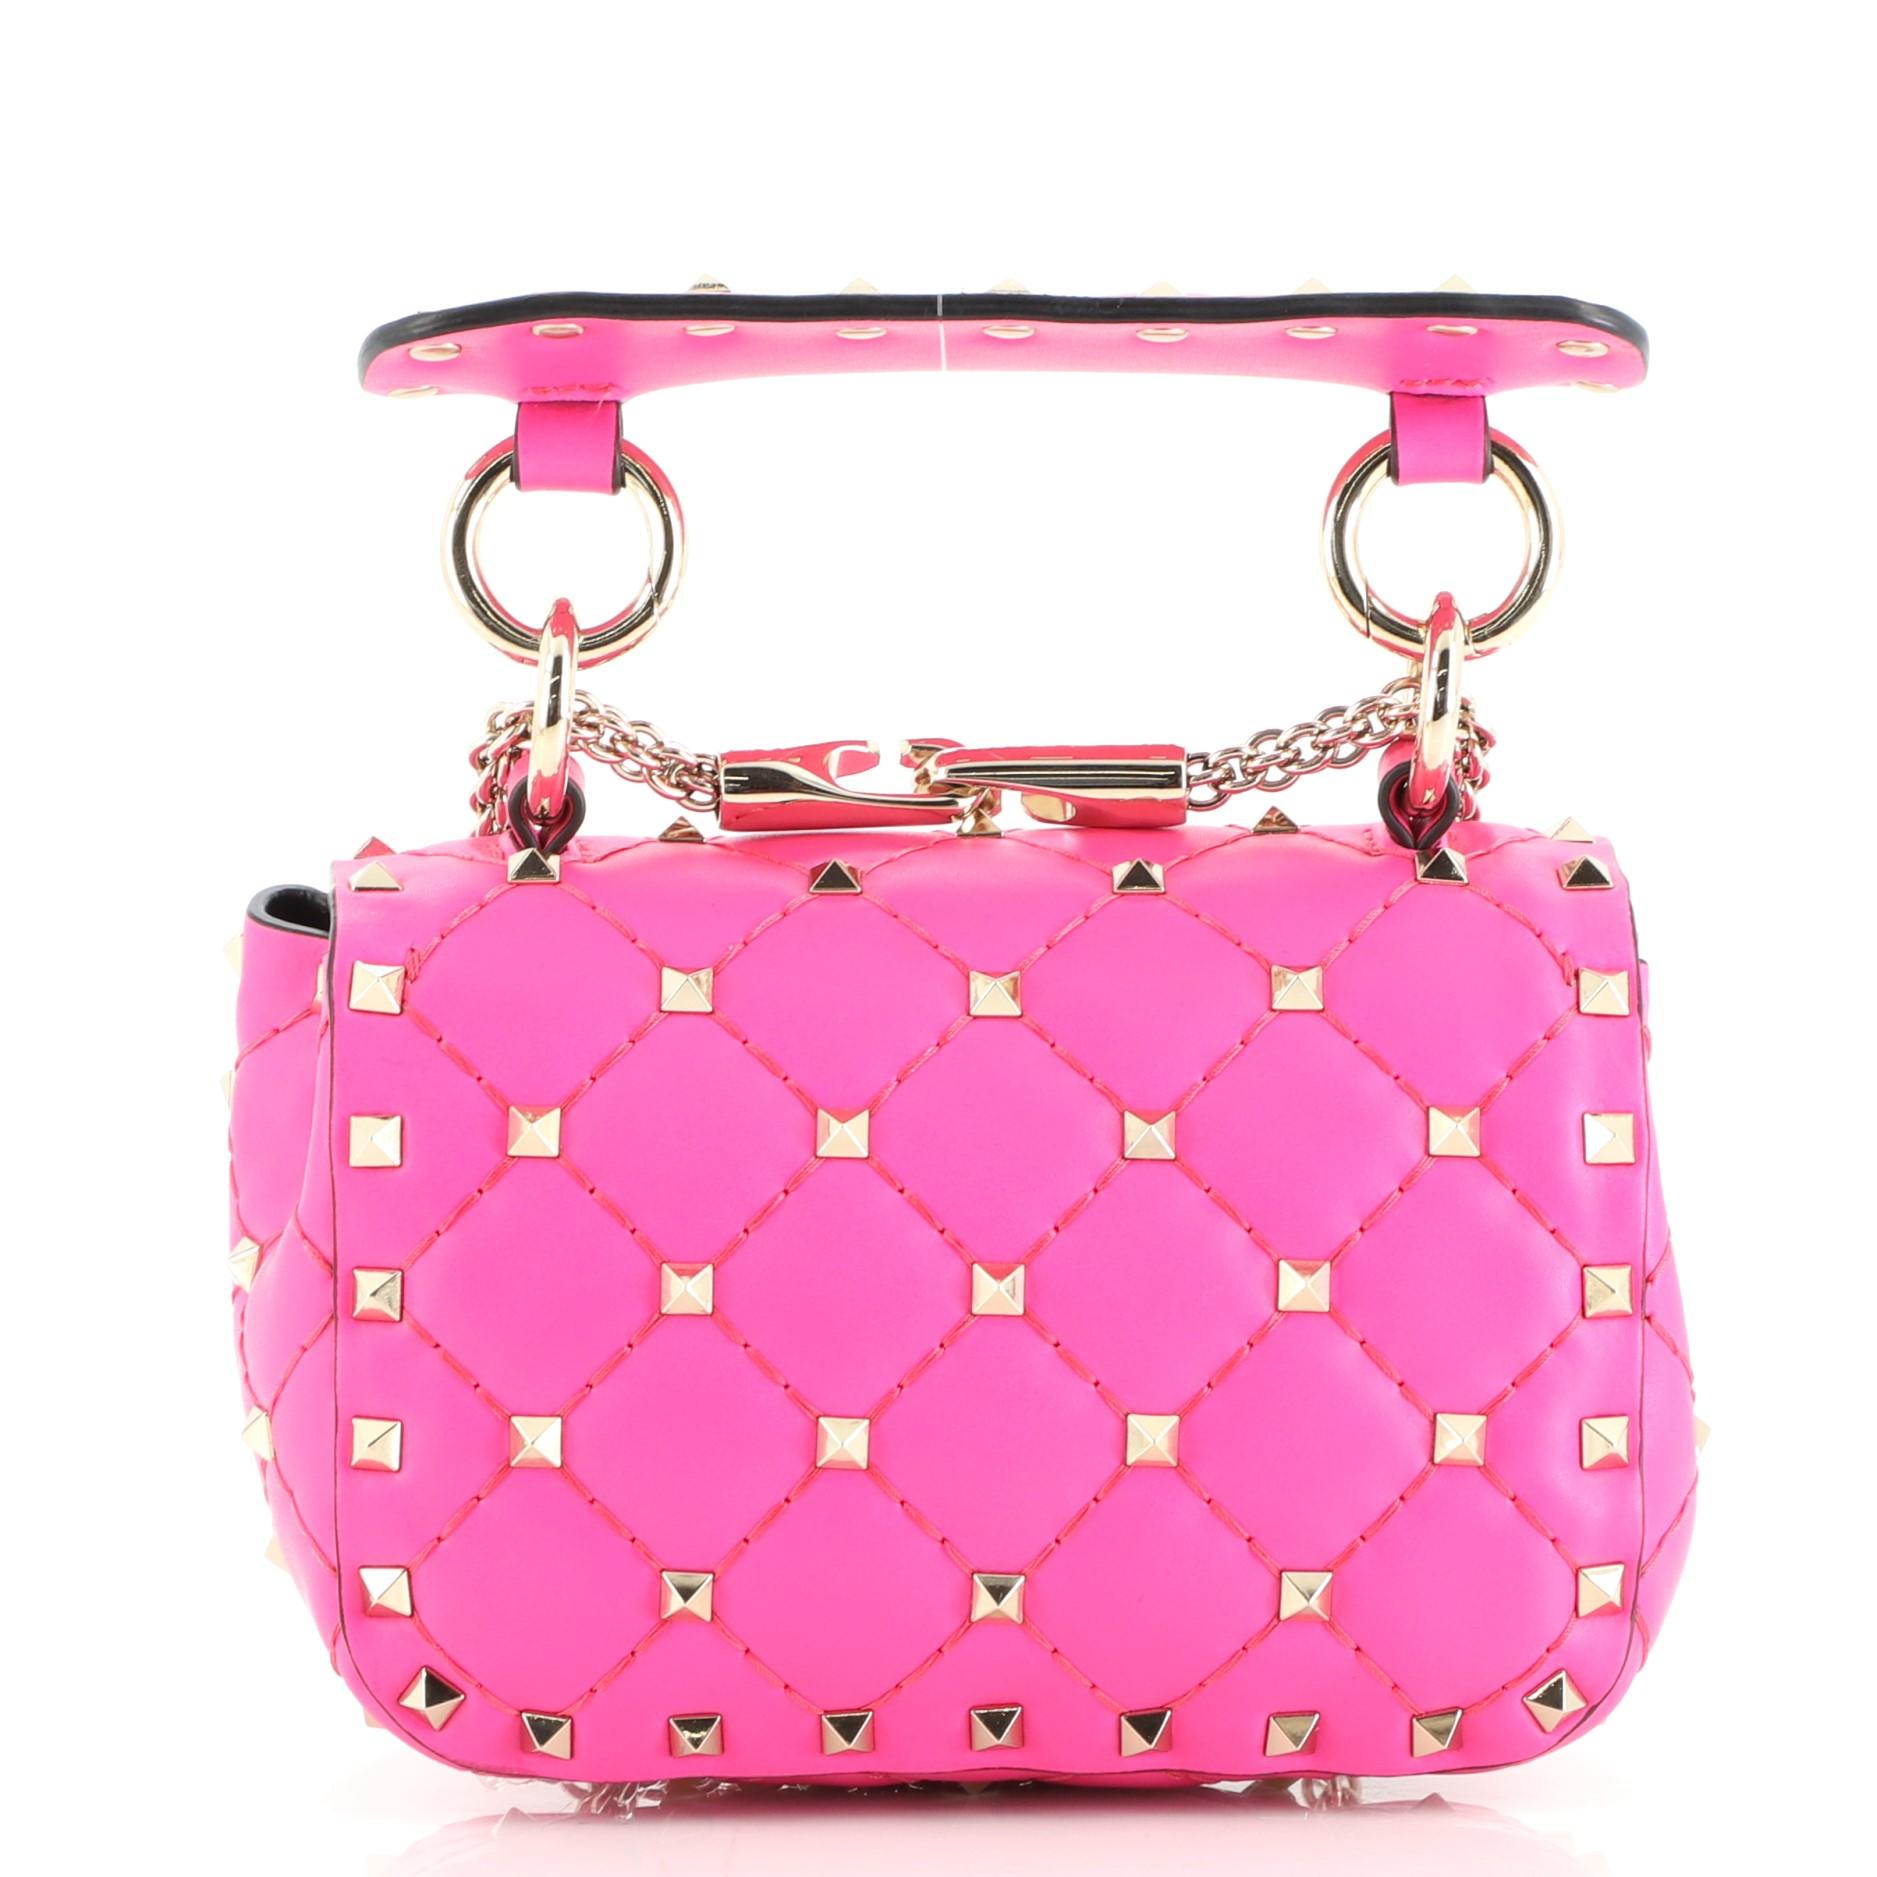 Pink Valentino Rockstud Spike Flap Bag Quilted Leather Micro